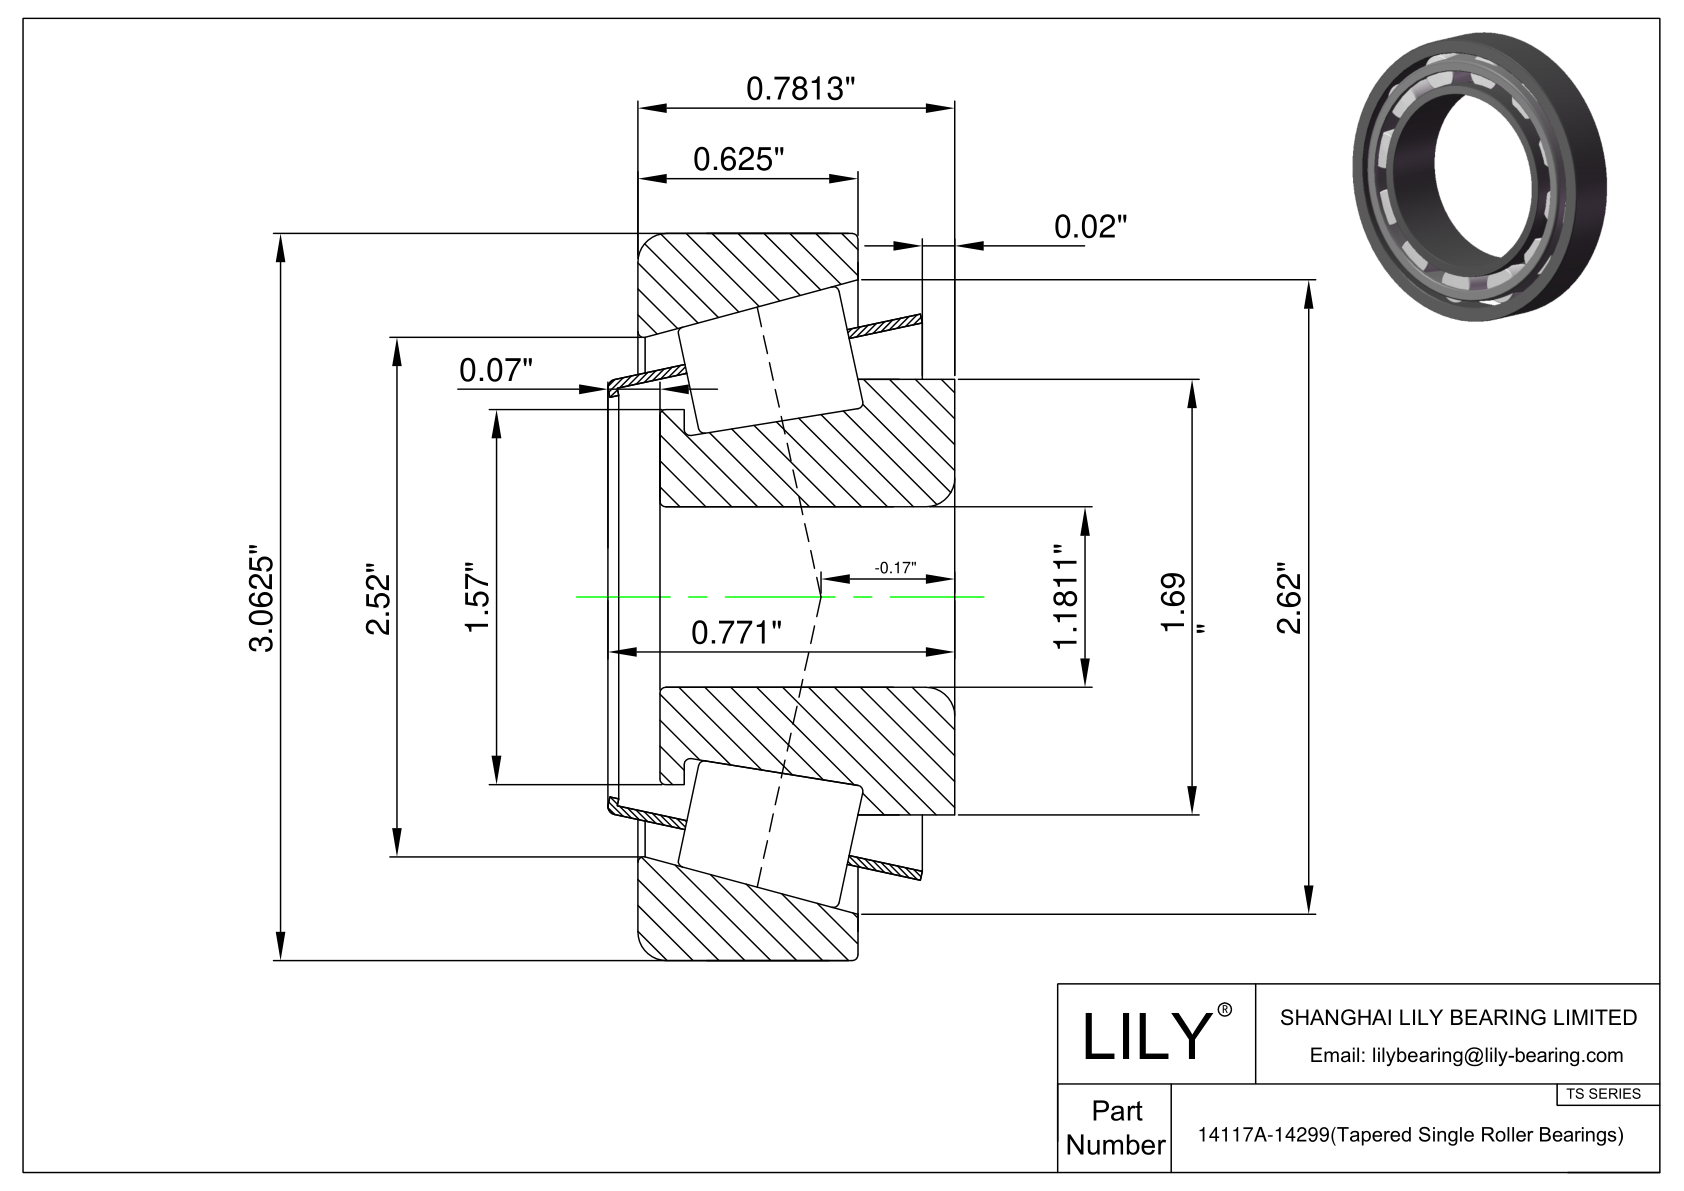 14117A-14299 TS (Tapered Single Roller Bearings) (Imperial) cad drawing